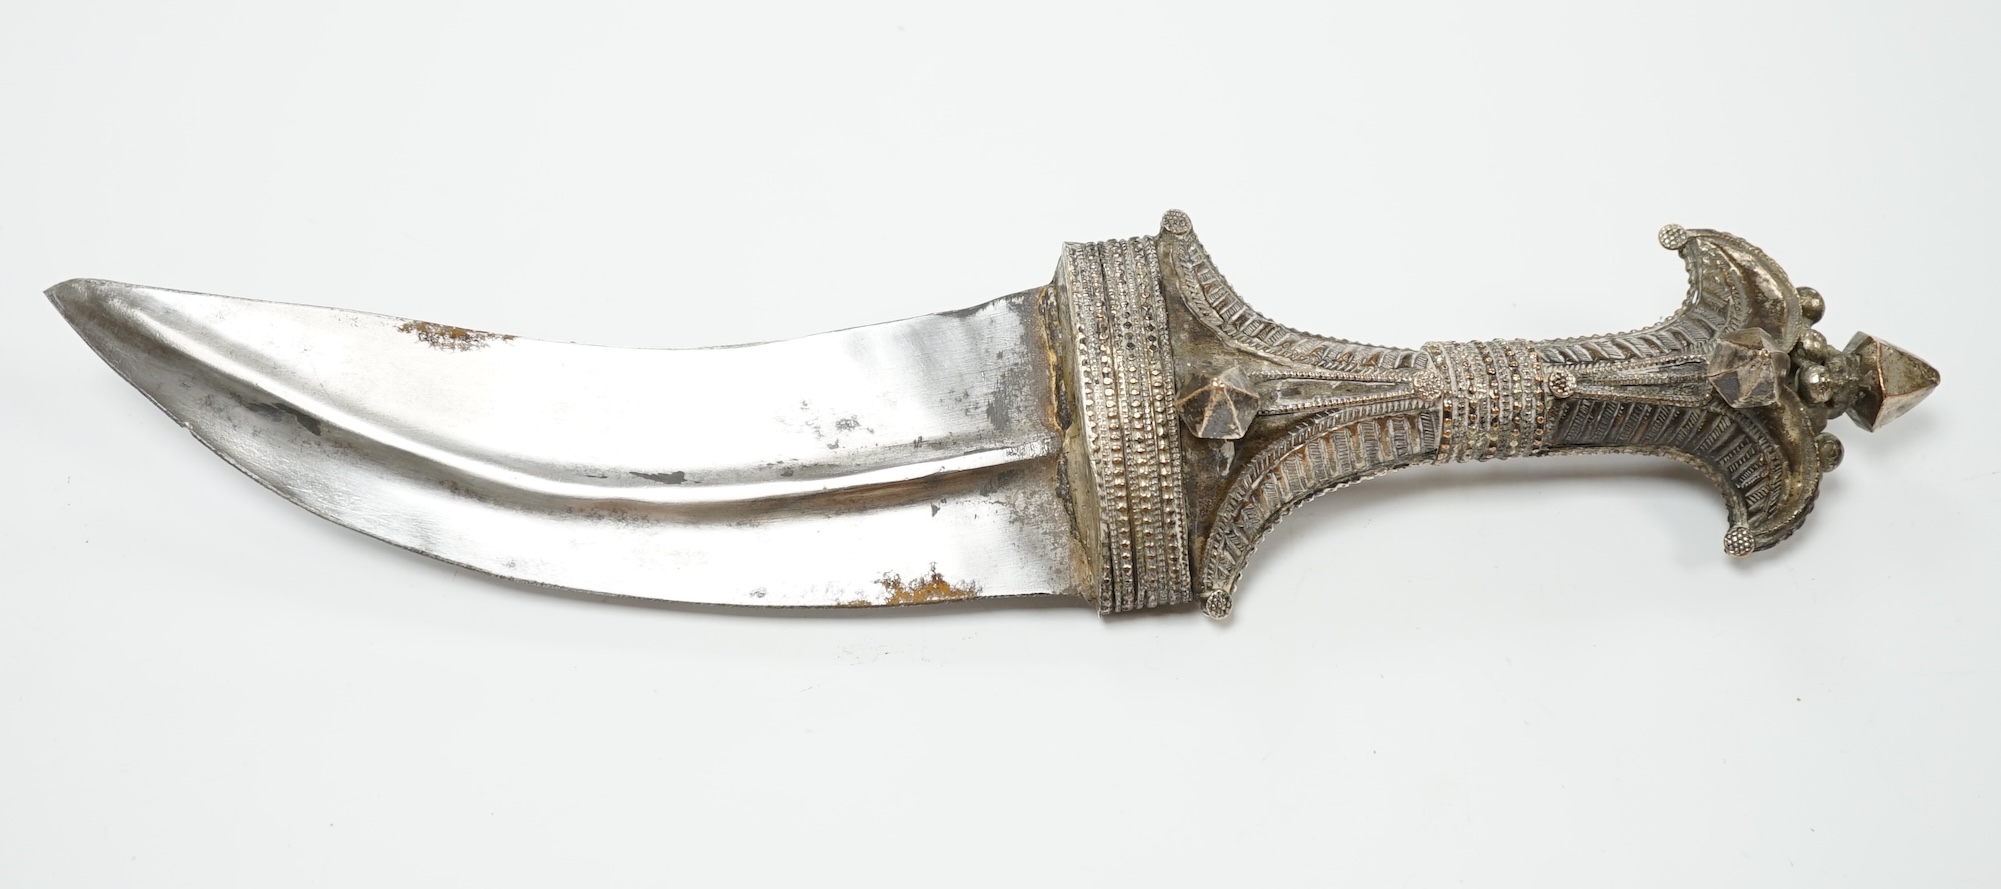 A composite Saudi dagger Jambiya c.1900, silver plated hilt, silver coloured metal sheath with engraved decoration. Condition - good, some wear